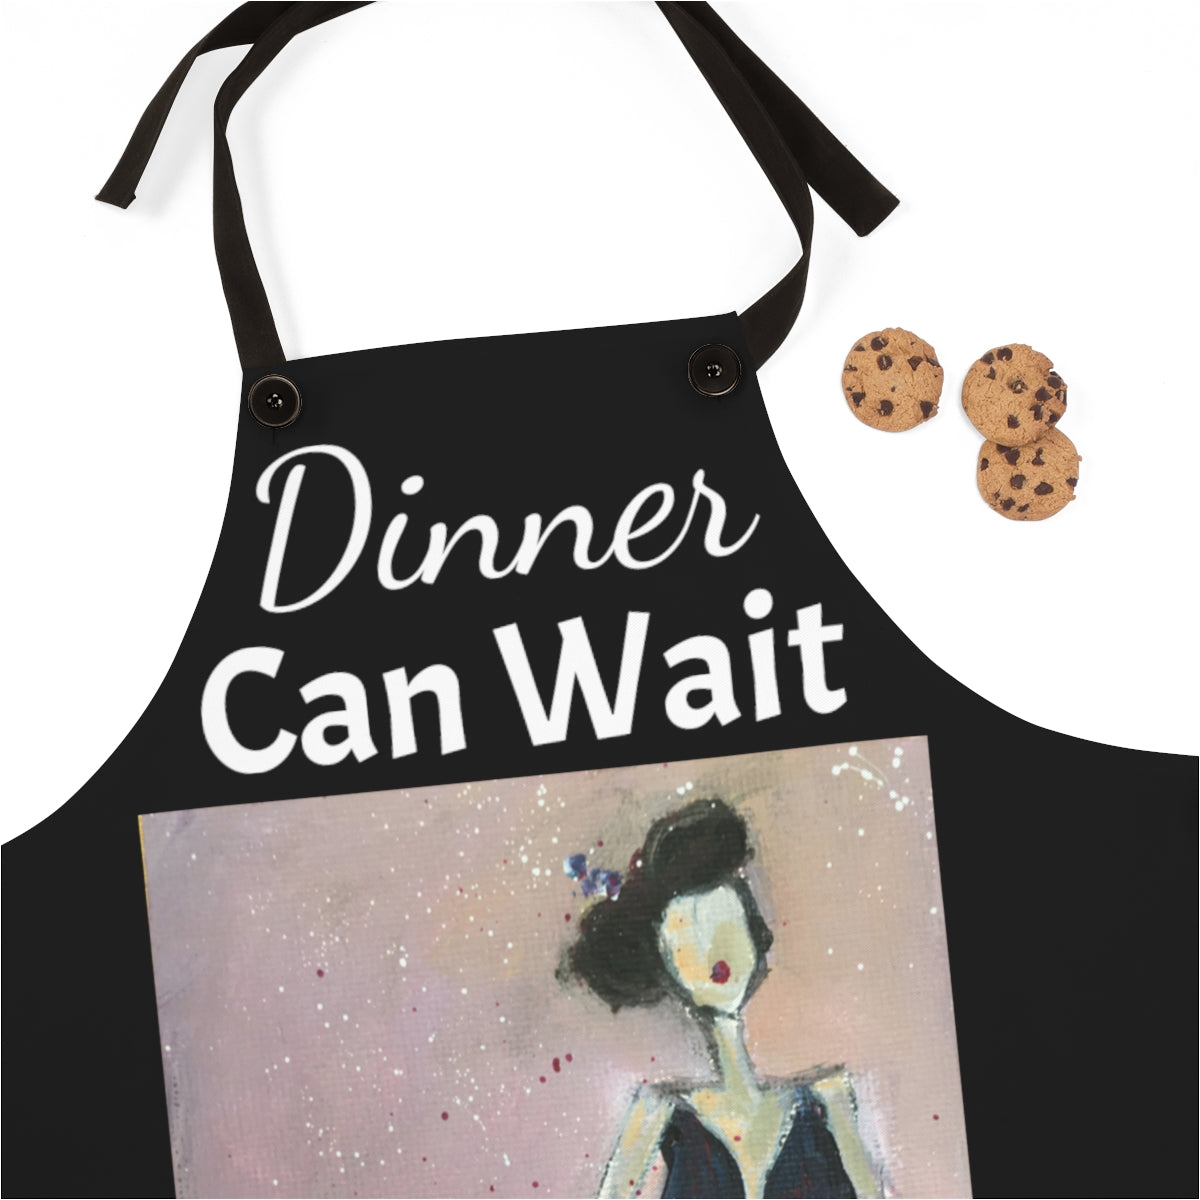 Dinner Can Wait on a Black Kitchen Apron